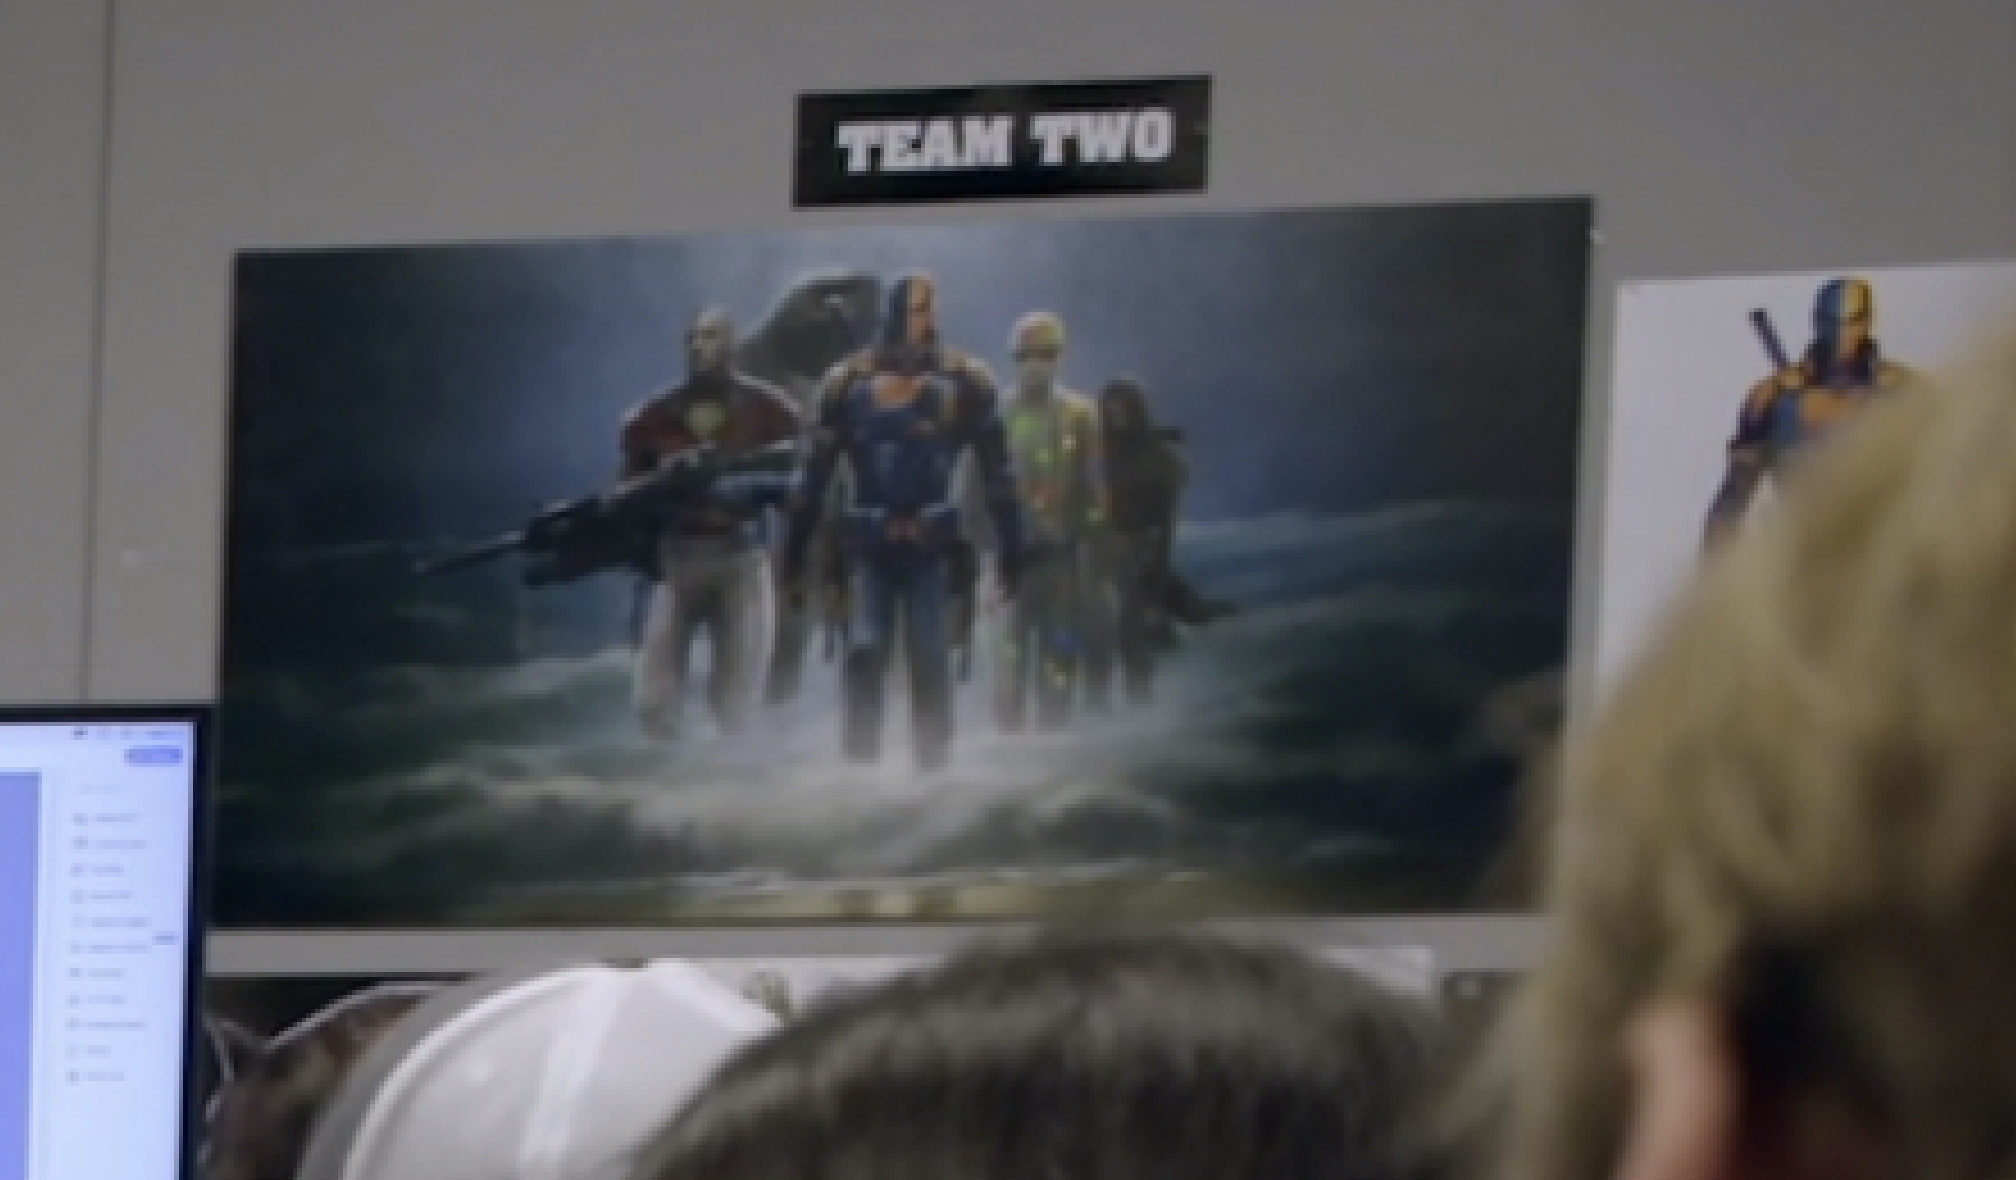 Deathstroke concept art is clearly visible in the HBO Max featurette &quot;The Suicide Squad: The Way of the Gunn&quot;